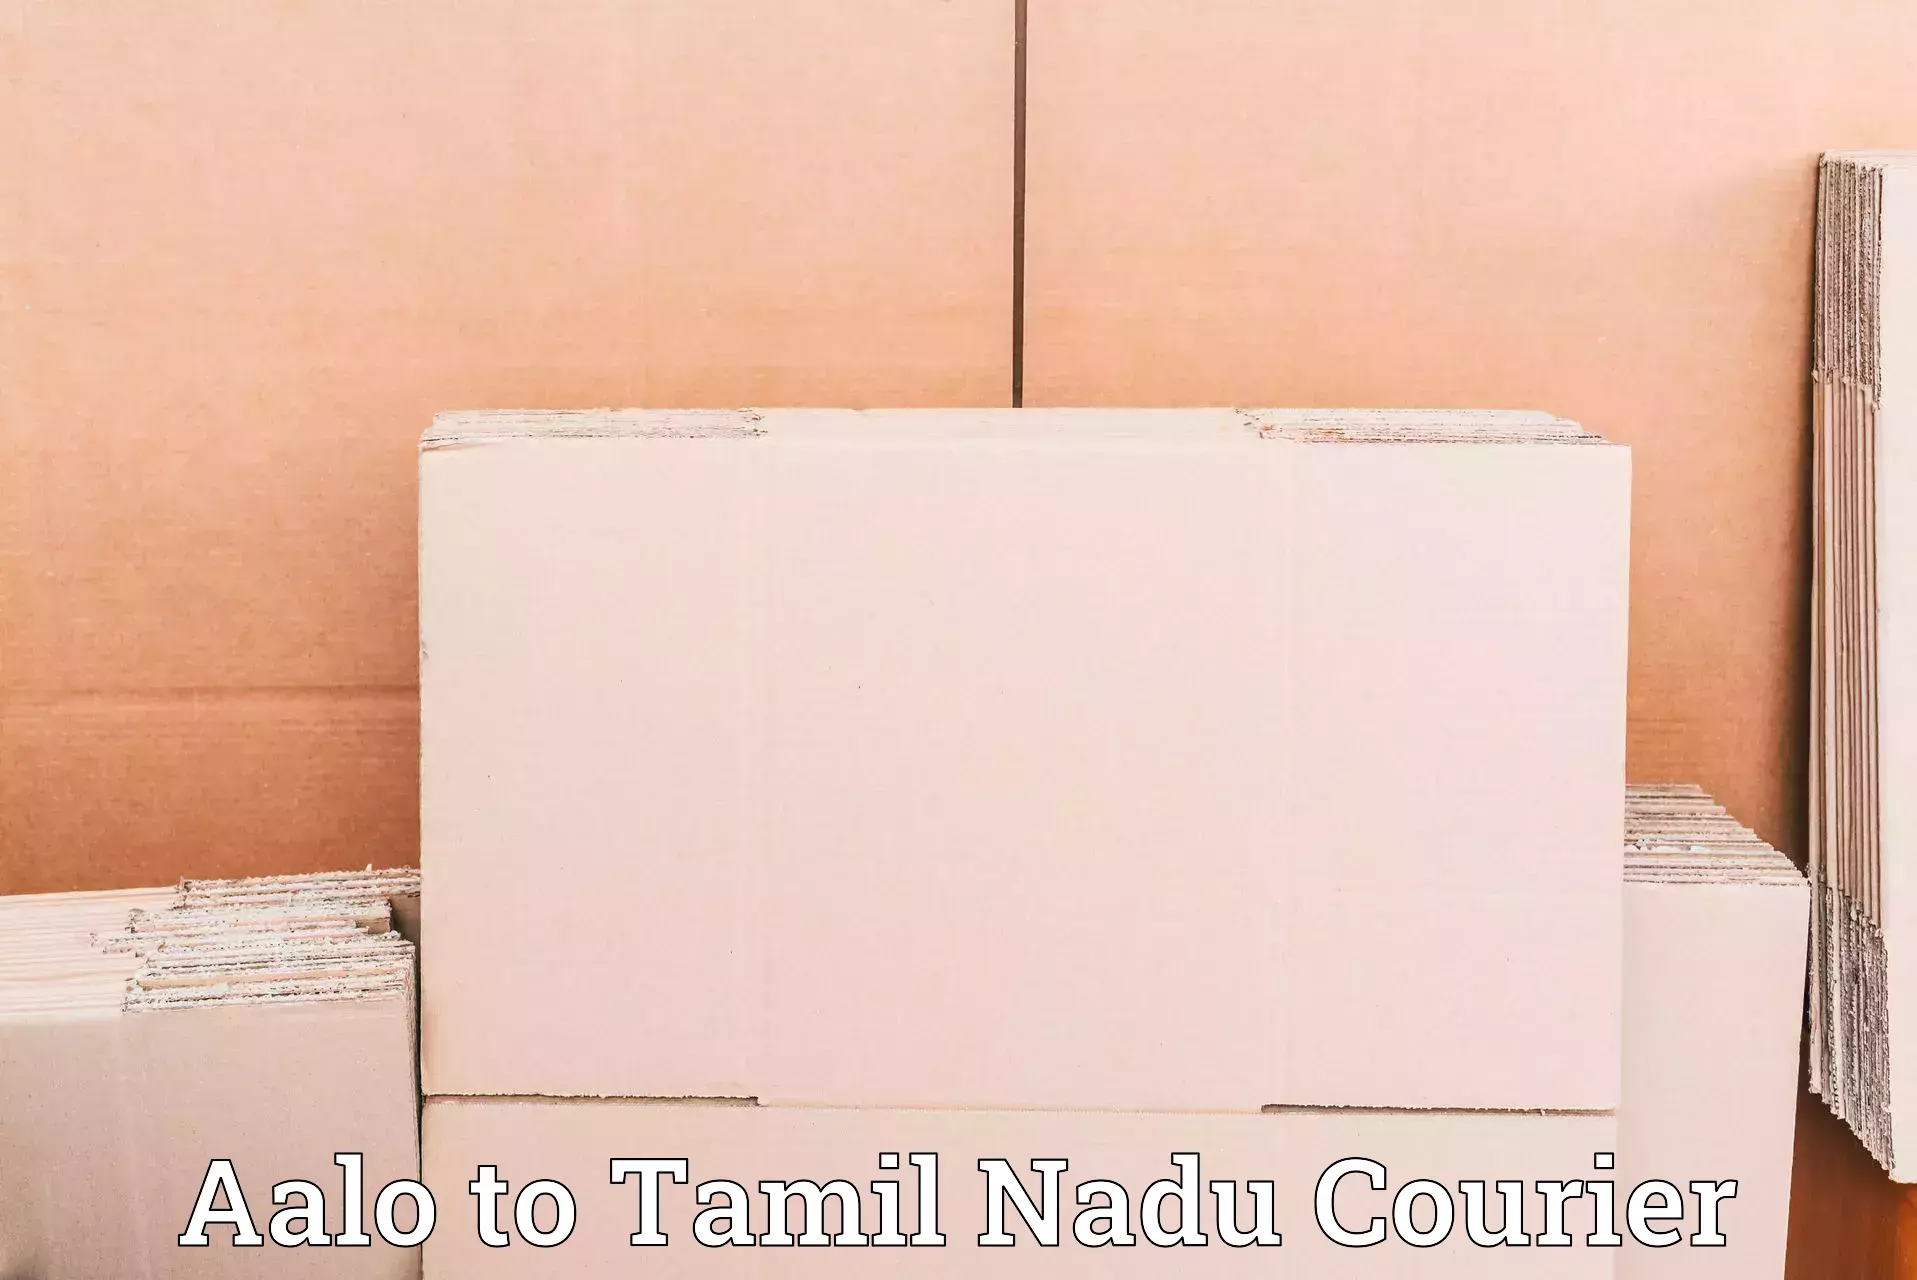 Full-service courier options Aalo to Chennai Port